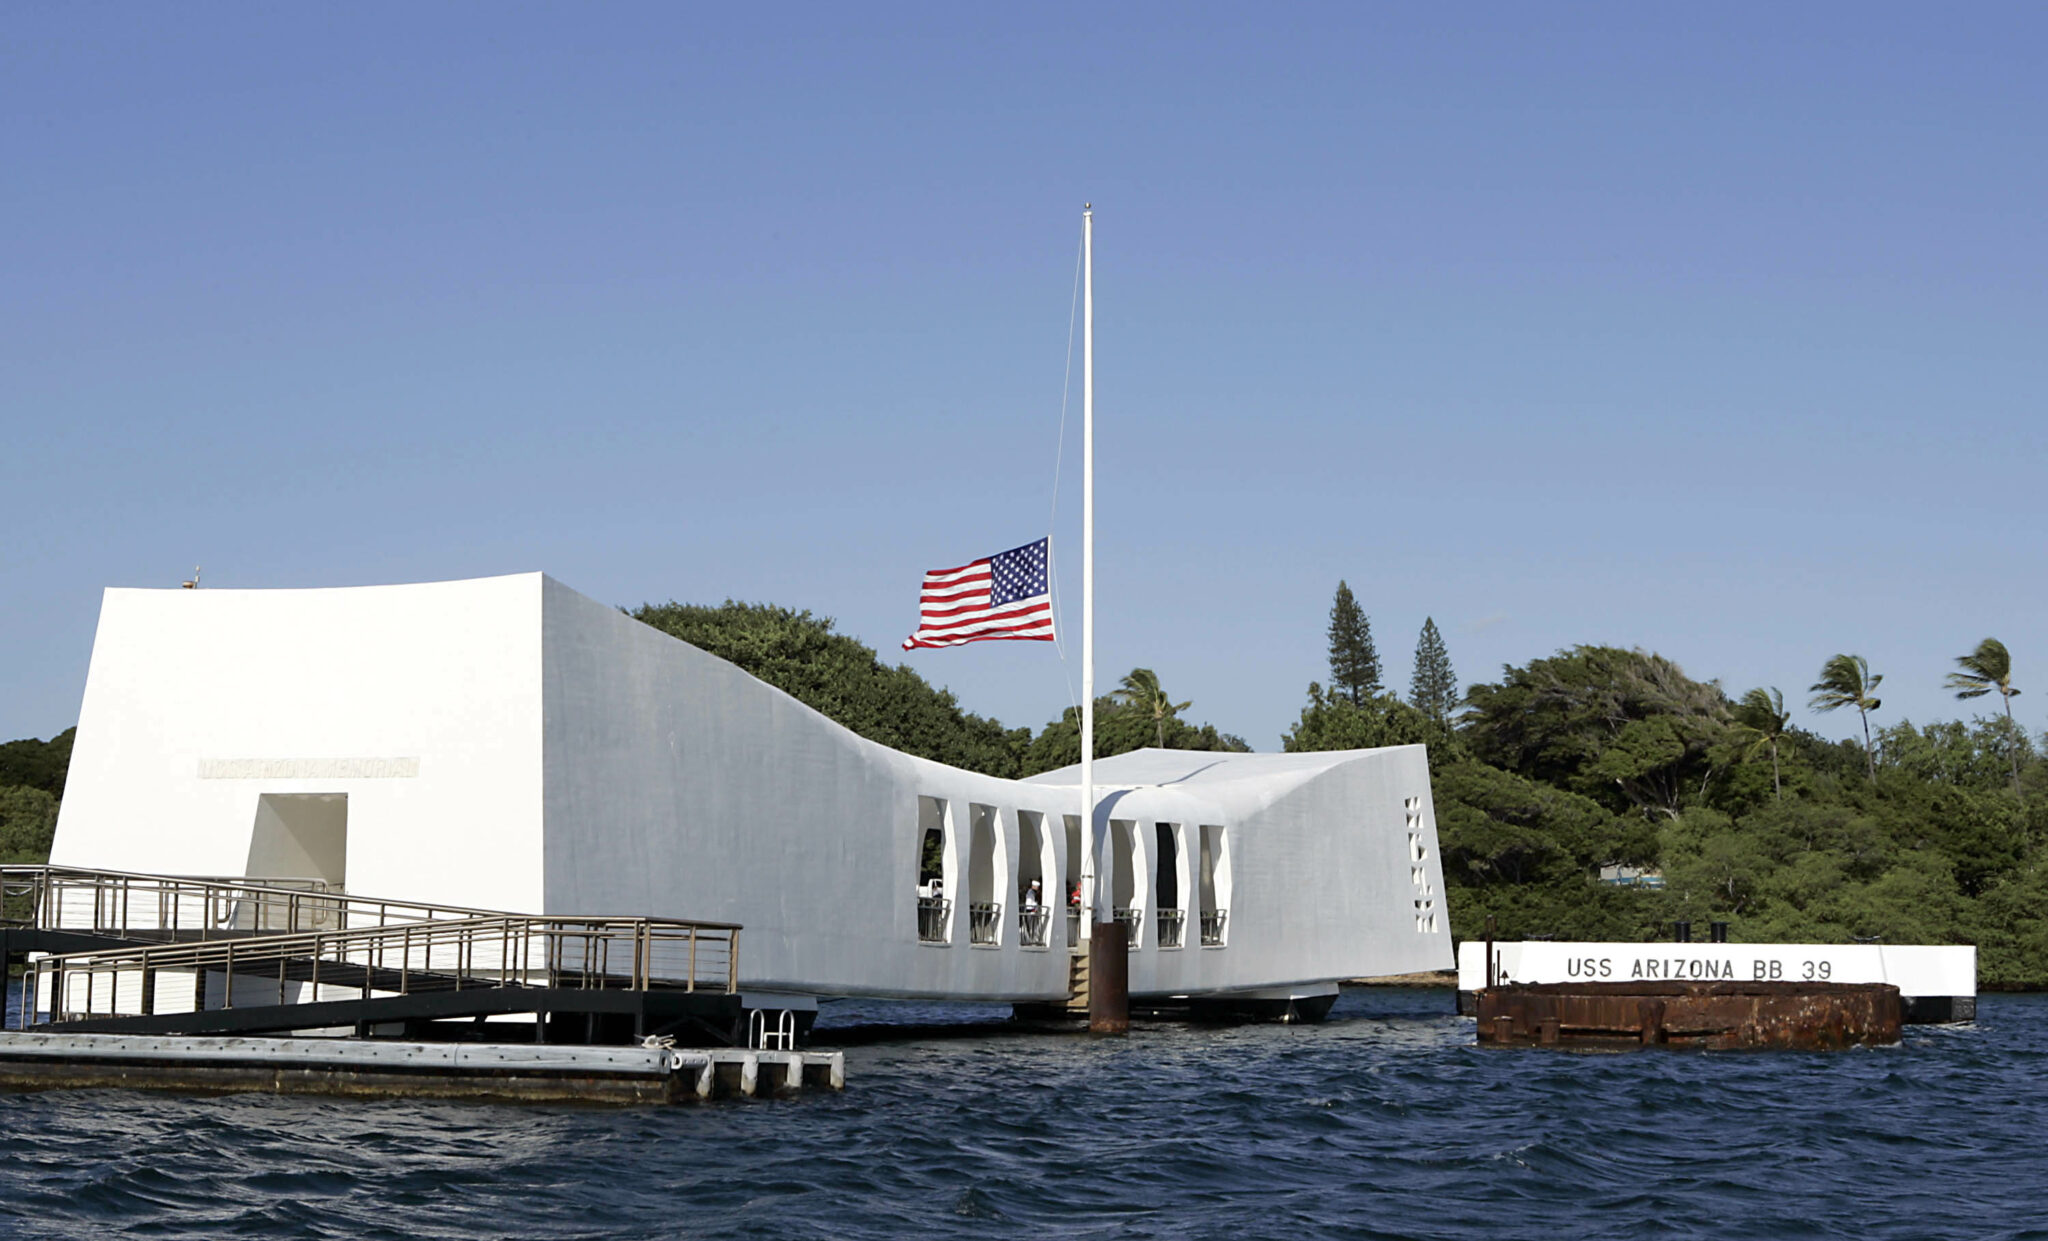 HONOLULU - DECEMBER 7:  A U.S. flag flies at half mast aboard the USS Arizona Memorial during the ceremony honoring the 64th anniversary of the surprise attack on Pearl Harbor, December 7, 2005 at Pearl Harbor, Hawaii. Around the country, Pearl Harbor survivors and others paid tribute to those lost during the December 7, 1941 Japanese bombing of Pearl Harbor.  (Photo by Marco Garcia/Getty Images)